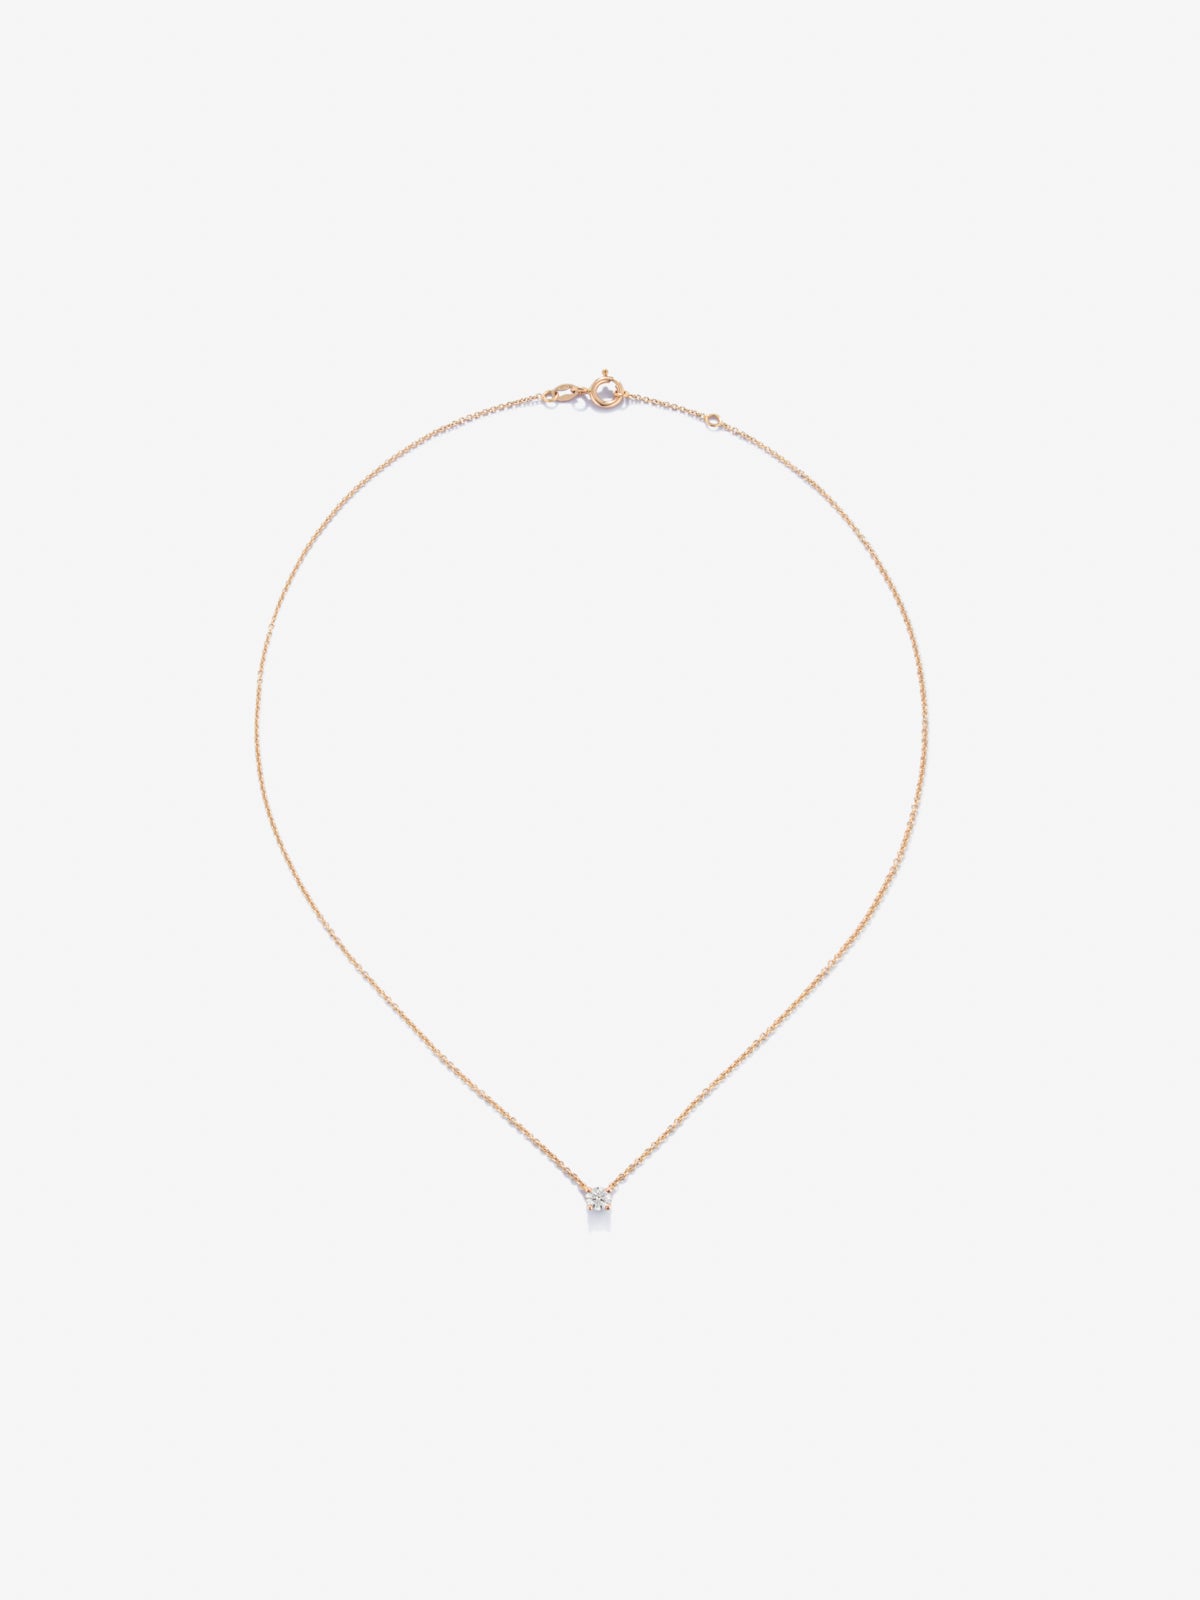 18K rose gold chain pendant with solitary diamond